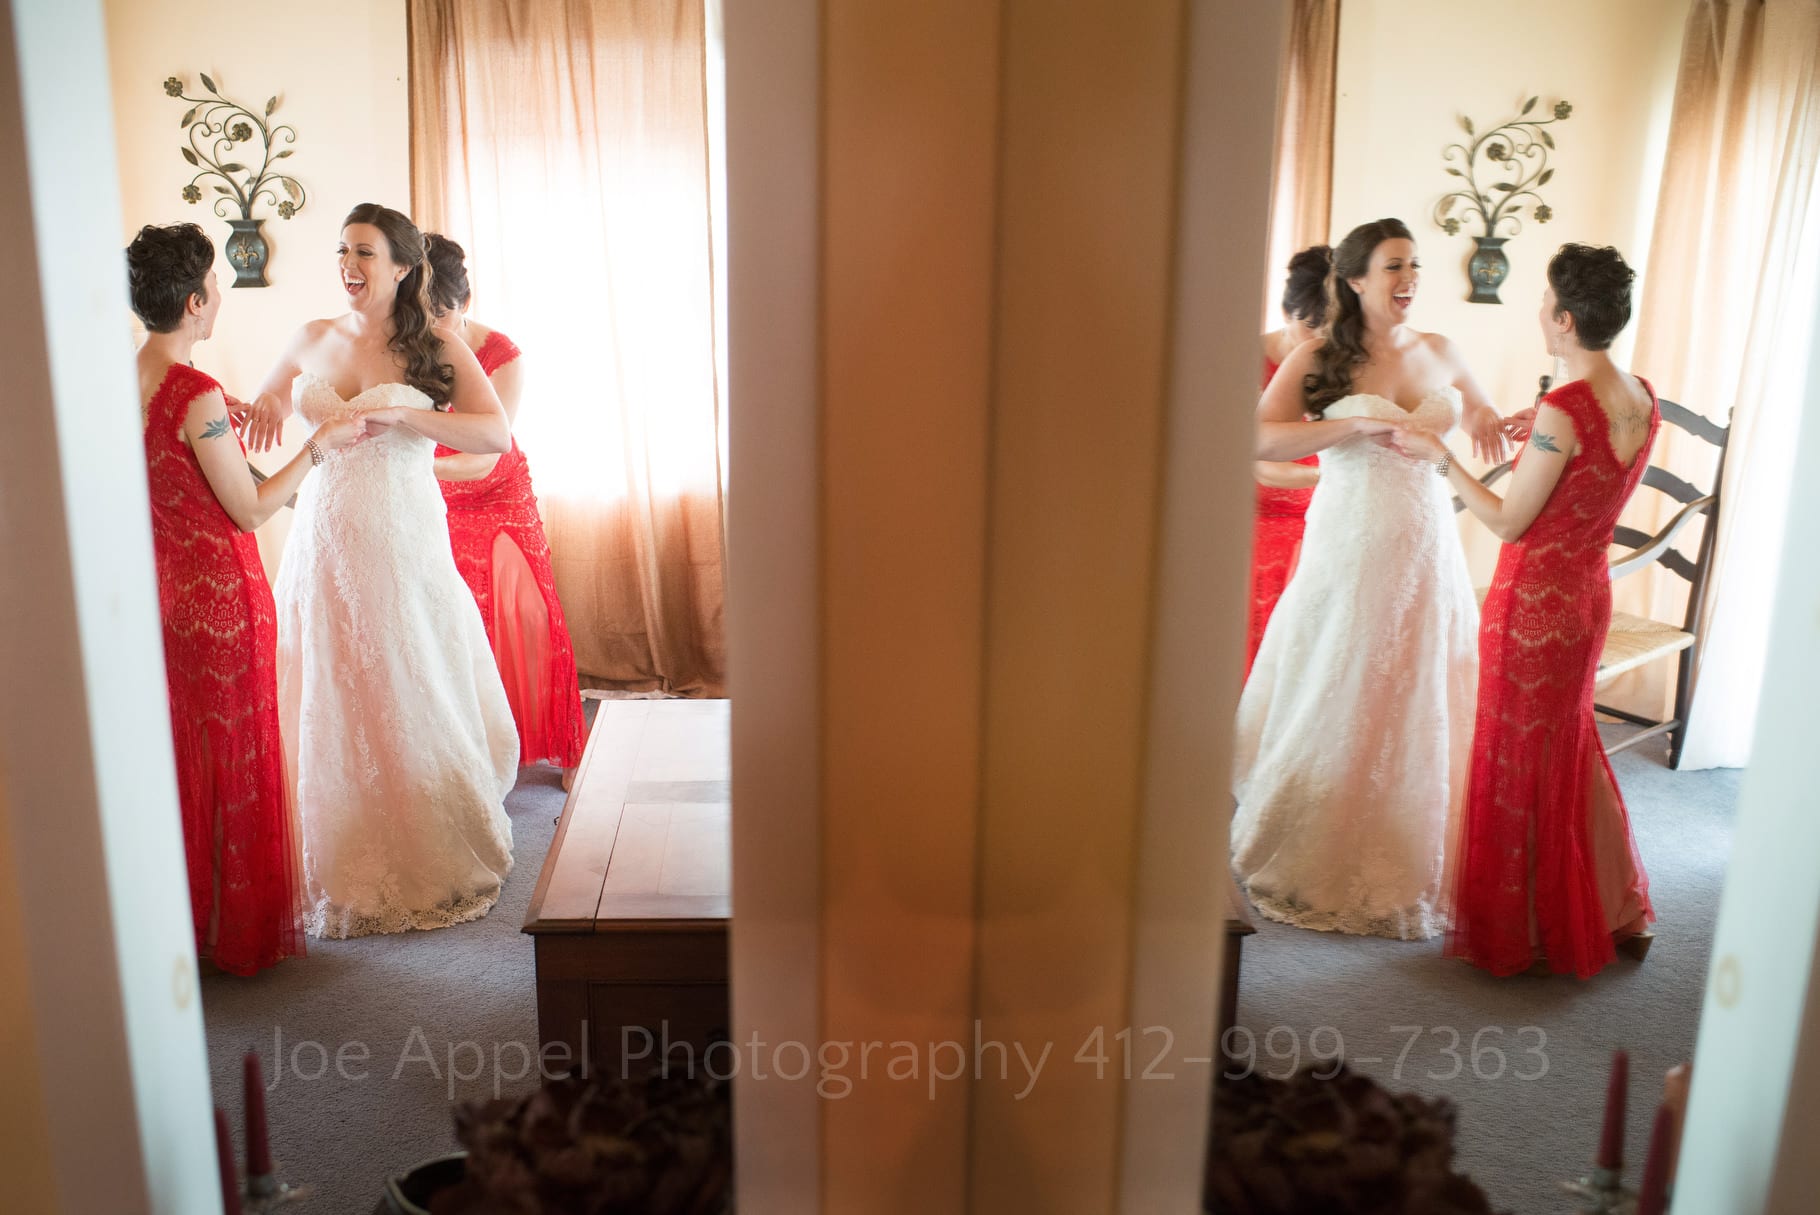 A double view of a bride being helped into her wedding dress caused by a reflection in a bathroom mirror during their Chanteclaire Farm Wedding.